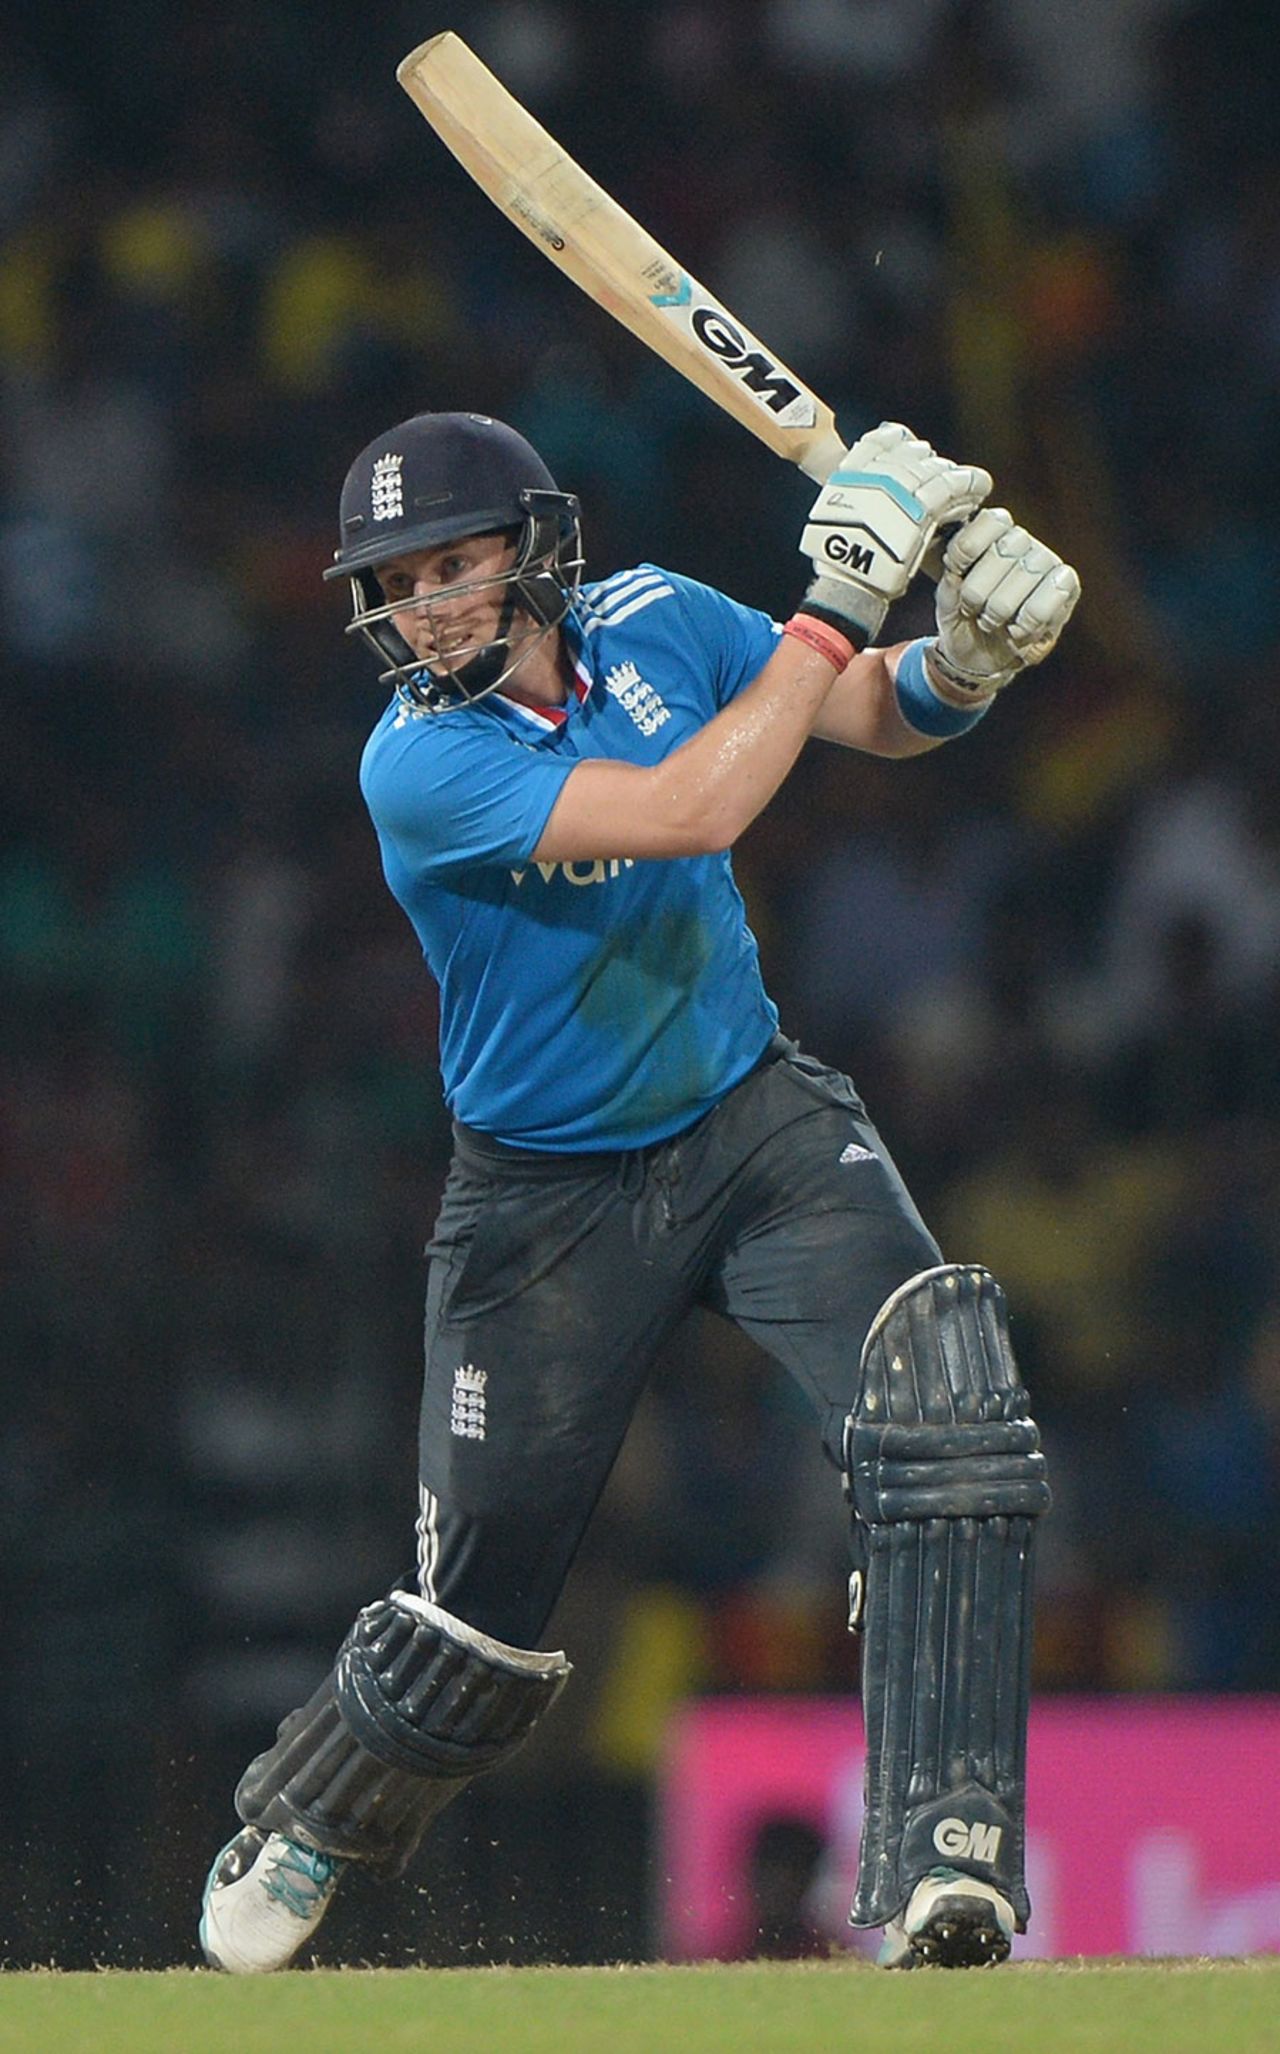 Amid the wreckage Joe Root played another lovely innings, Sri Lanka v England, 7th ODI, Colombo, December 16, 2014